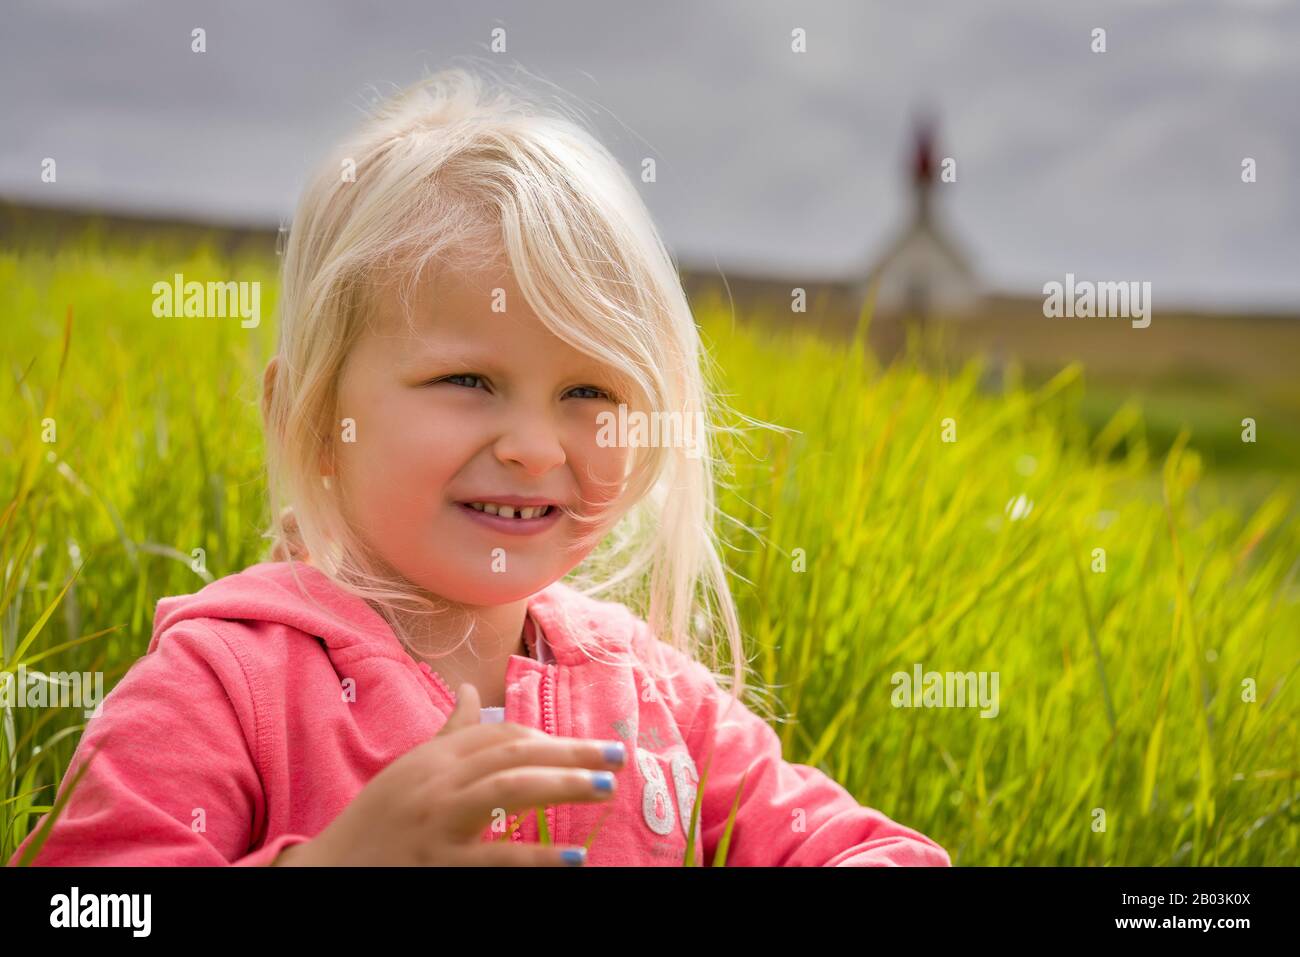 Young girl sitting in the grass, summertime, Iceland Stock Photo